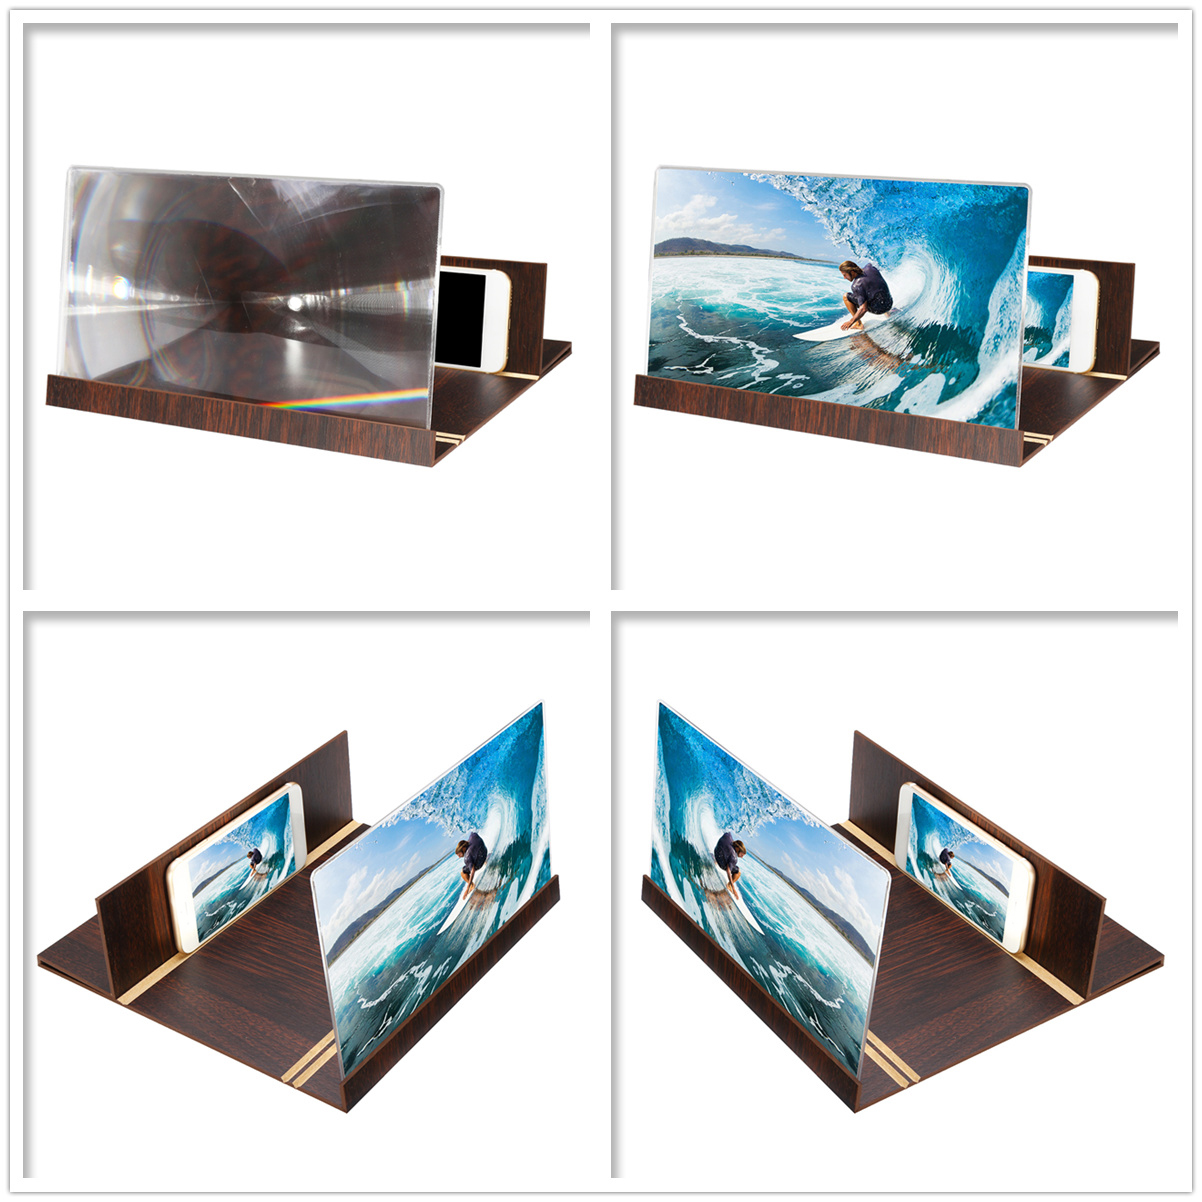 12quot-Wood-Foldable-3D-HD-Phone-Screen-Magnifier-Movie-Video-Amplifier-For-Smart-Phone-iPhone-XS-Ma-1534035-6